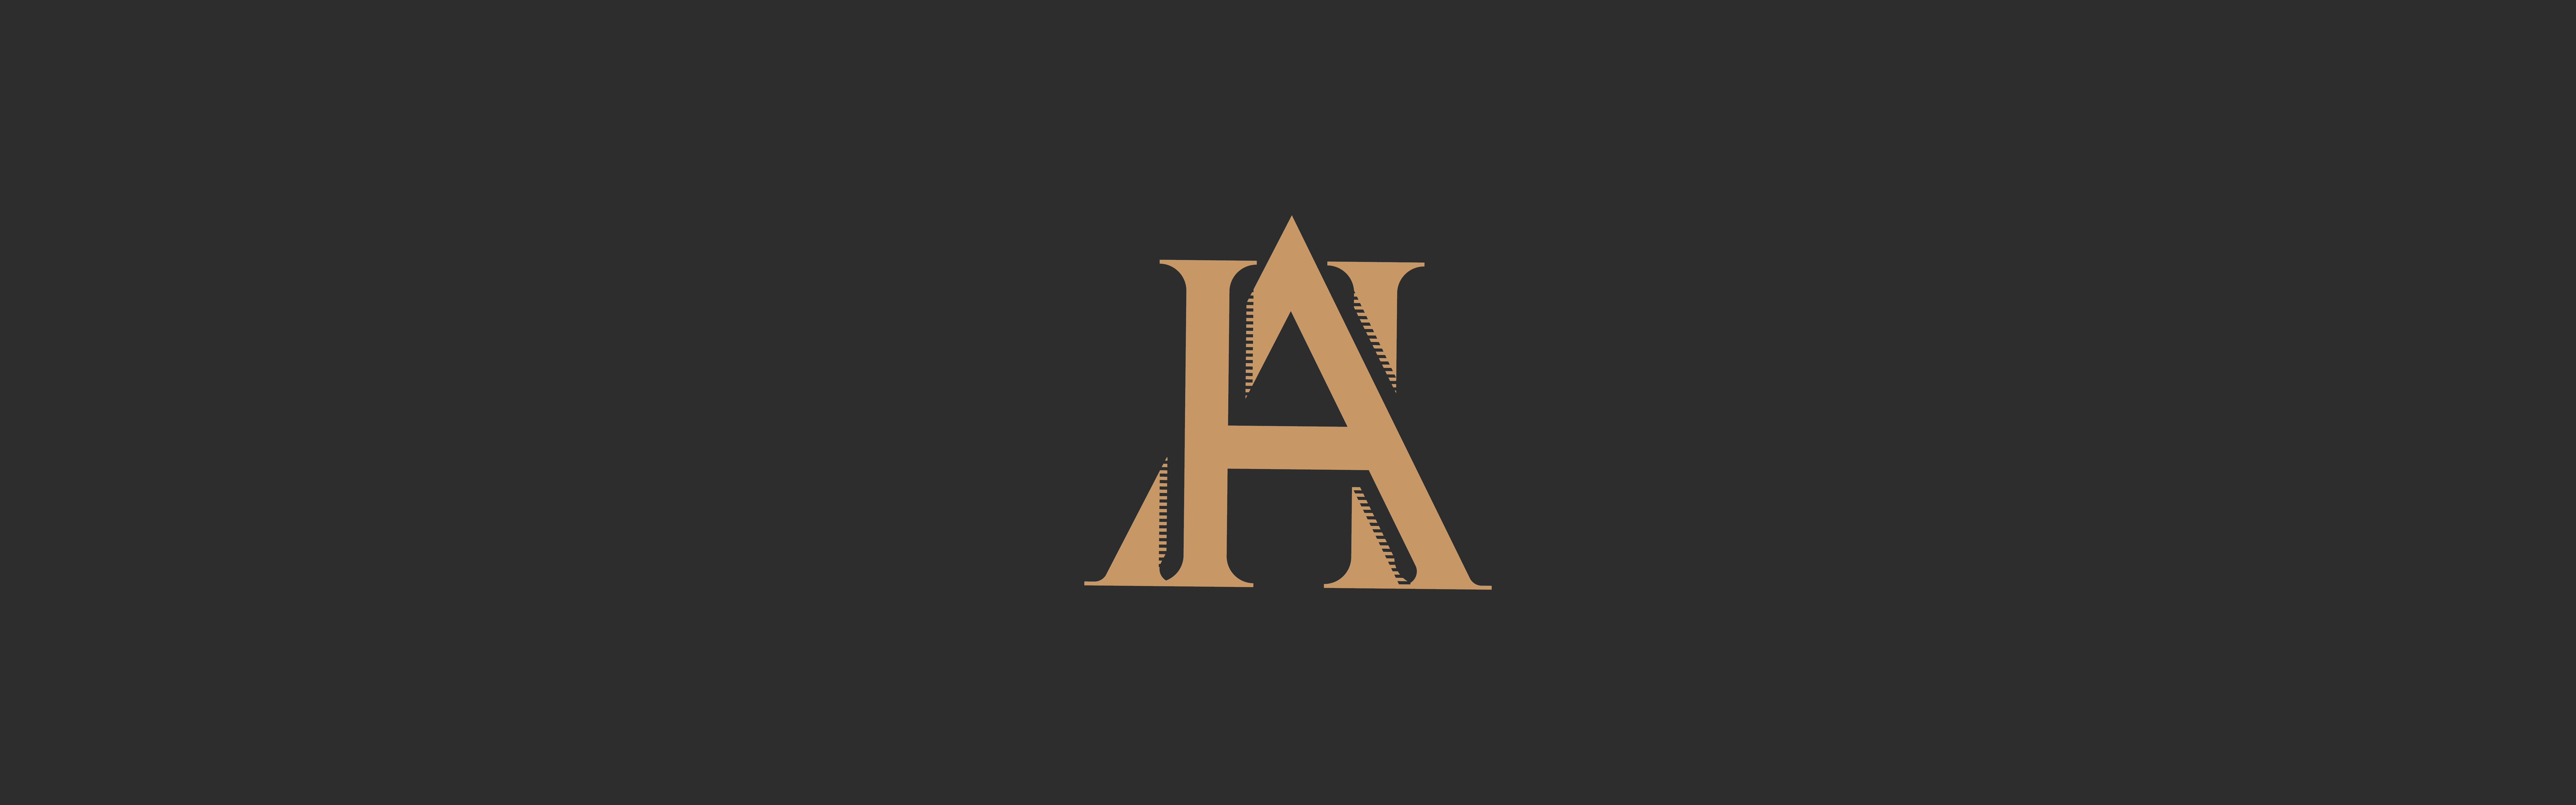 Gold letter "a" with lace-up details on a black background at Hotel Americano.